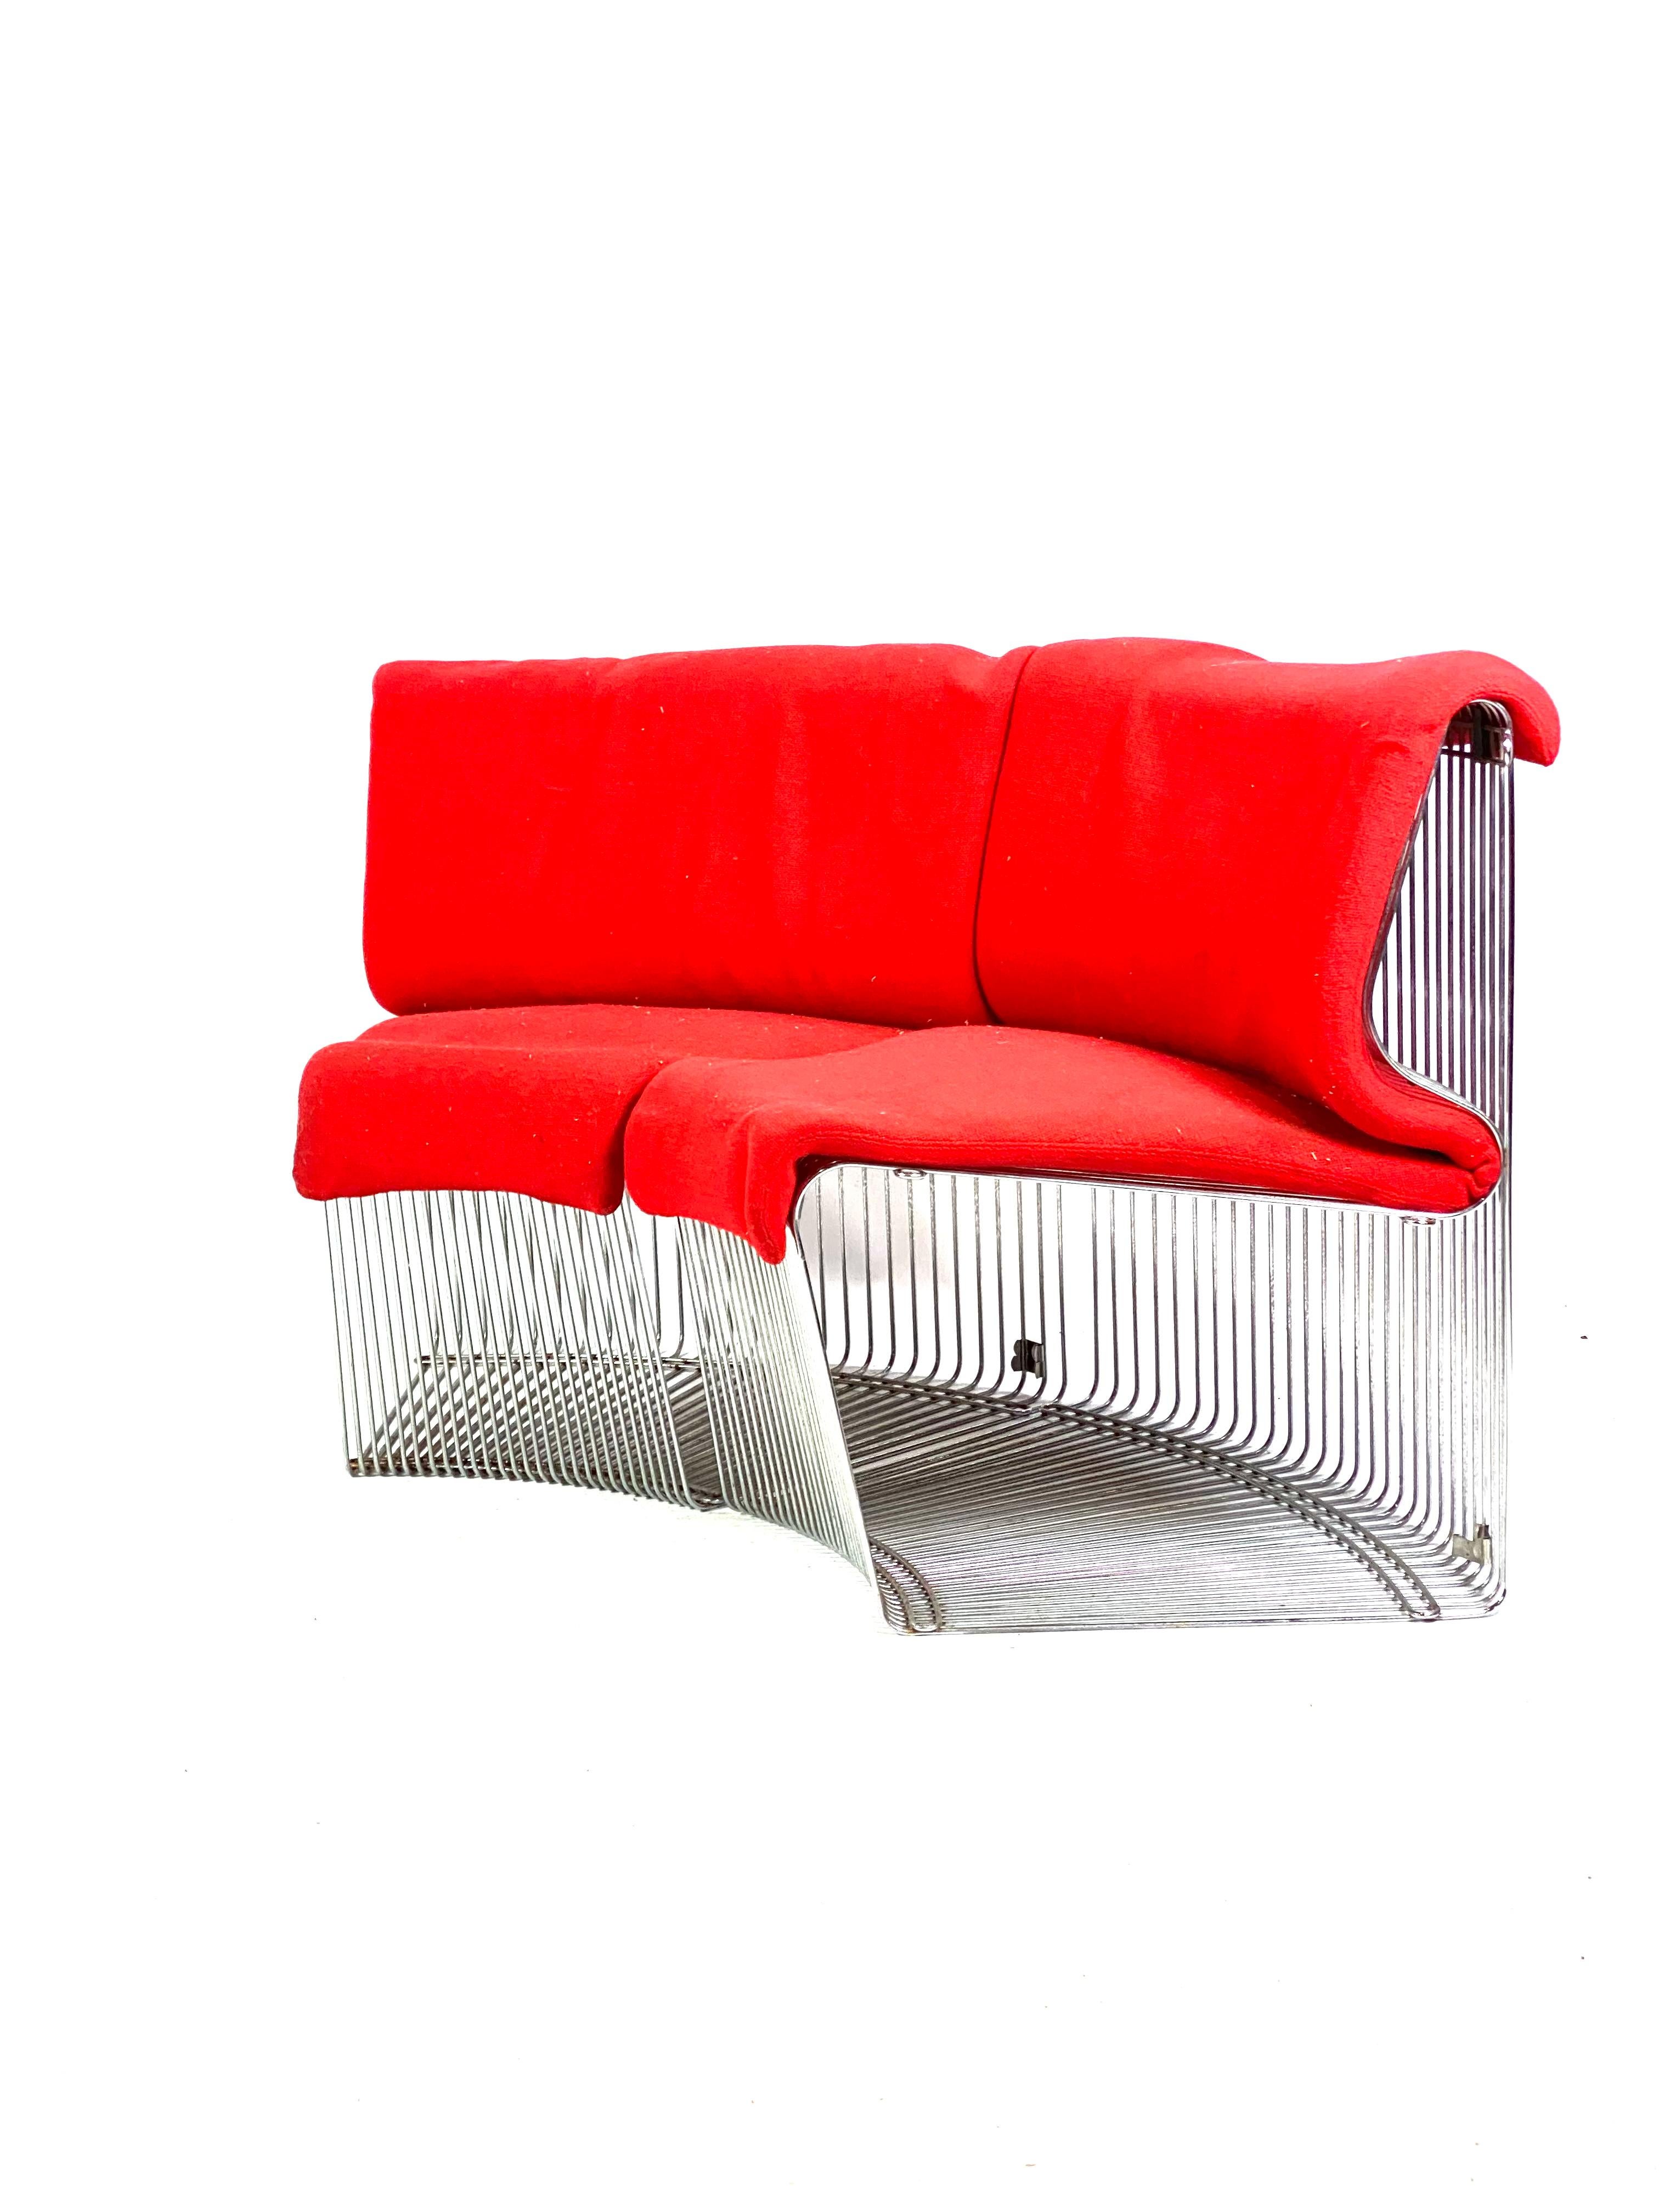 Set of two Convex modules for the Pantonova system designed by Verner Panton in 1971 and manufactured by Fritz Hansen. The modules are with a frame of metal and upholstered with red wool fabric.